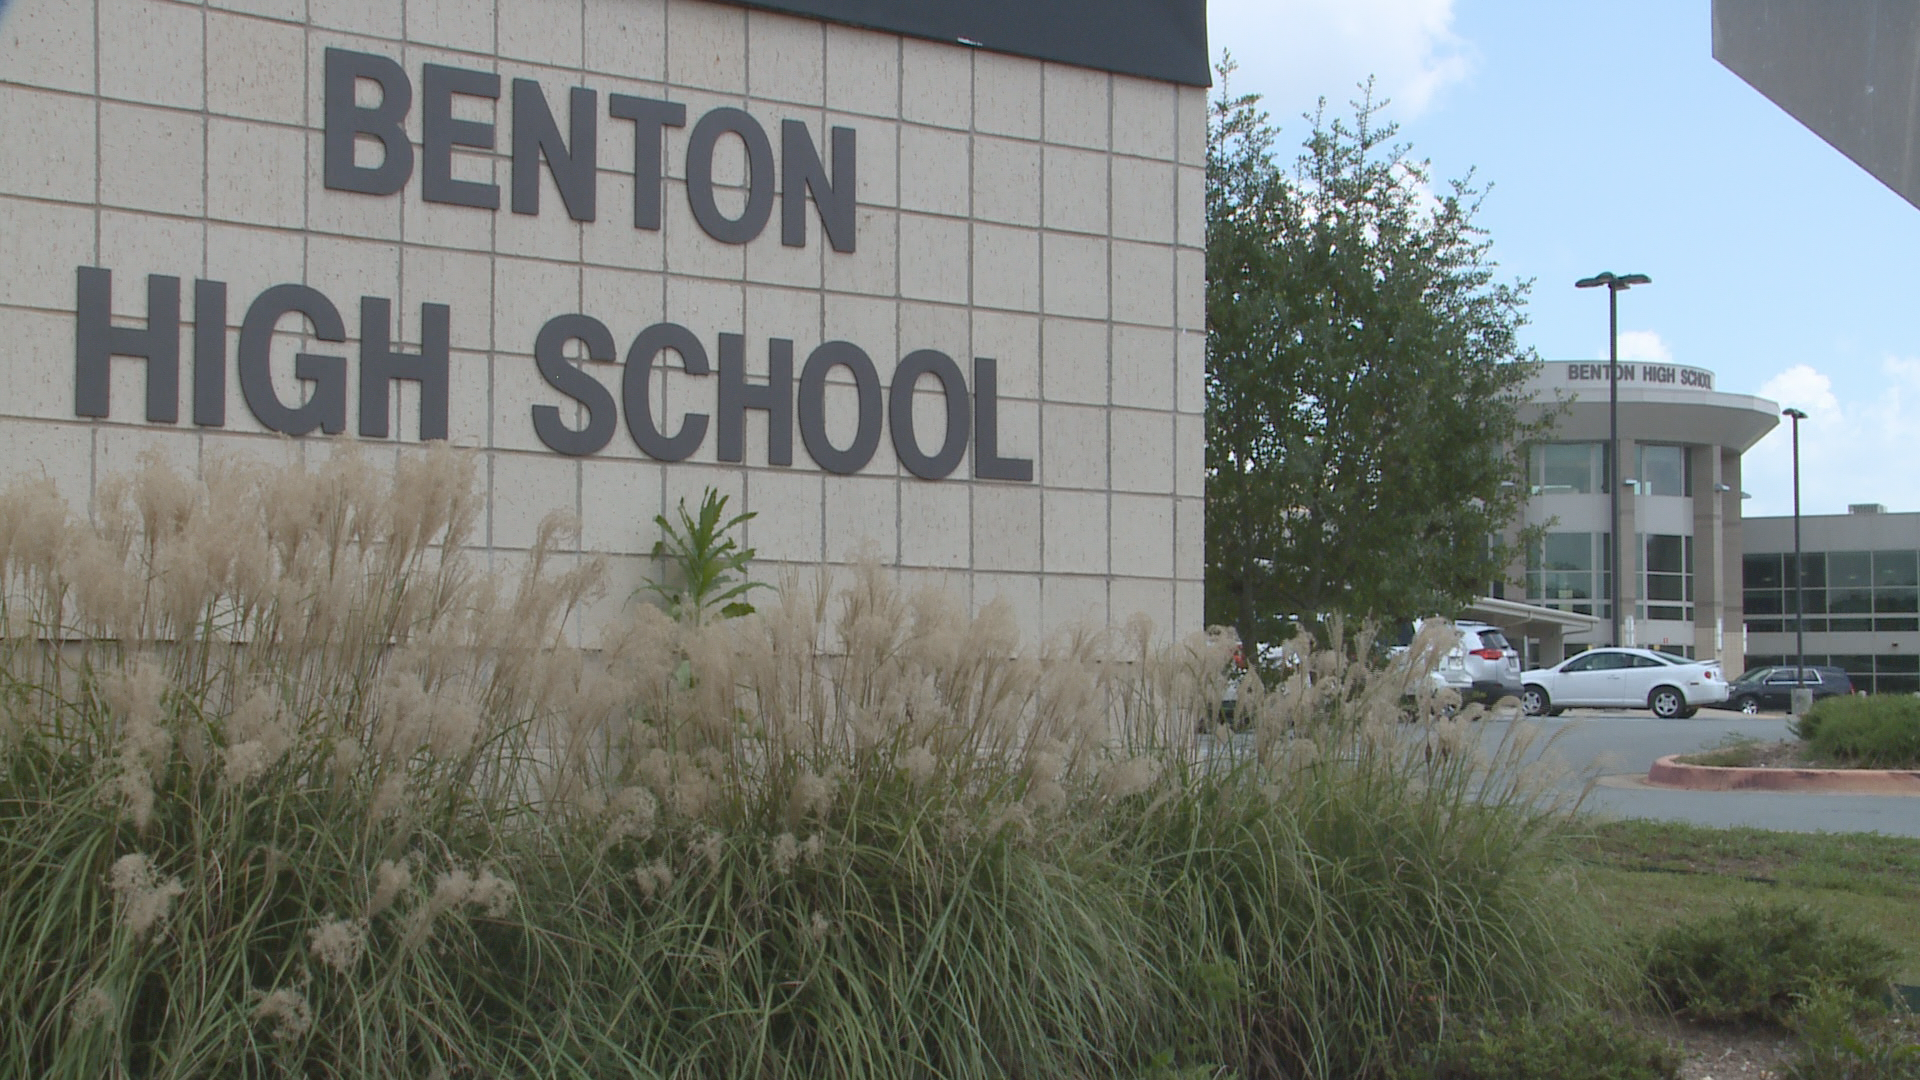 Benton schools placed on lockdown Tuesday after threatening email | THV11.com1920 x 1080